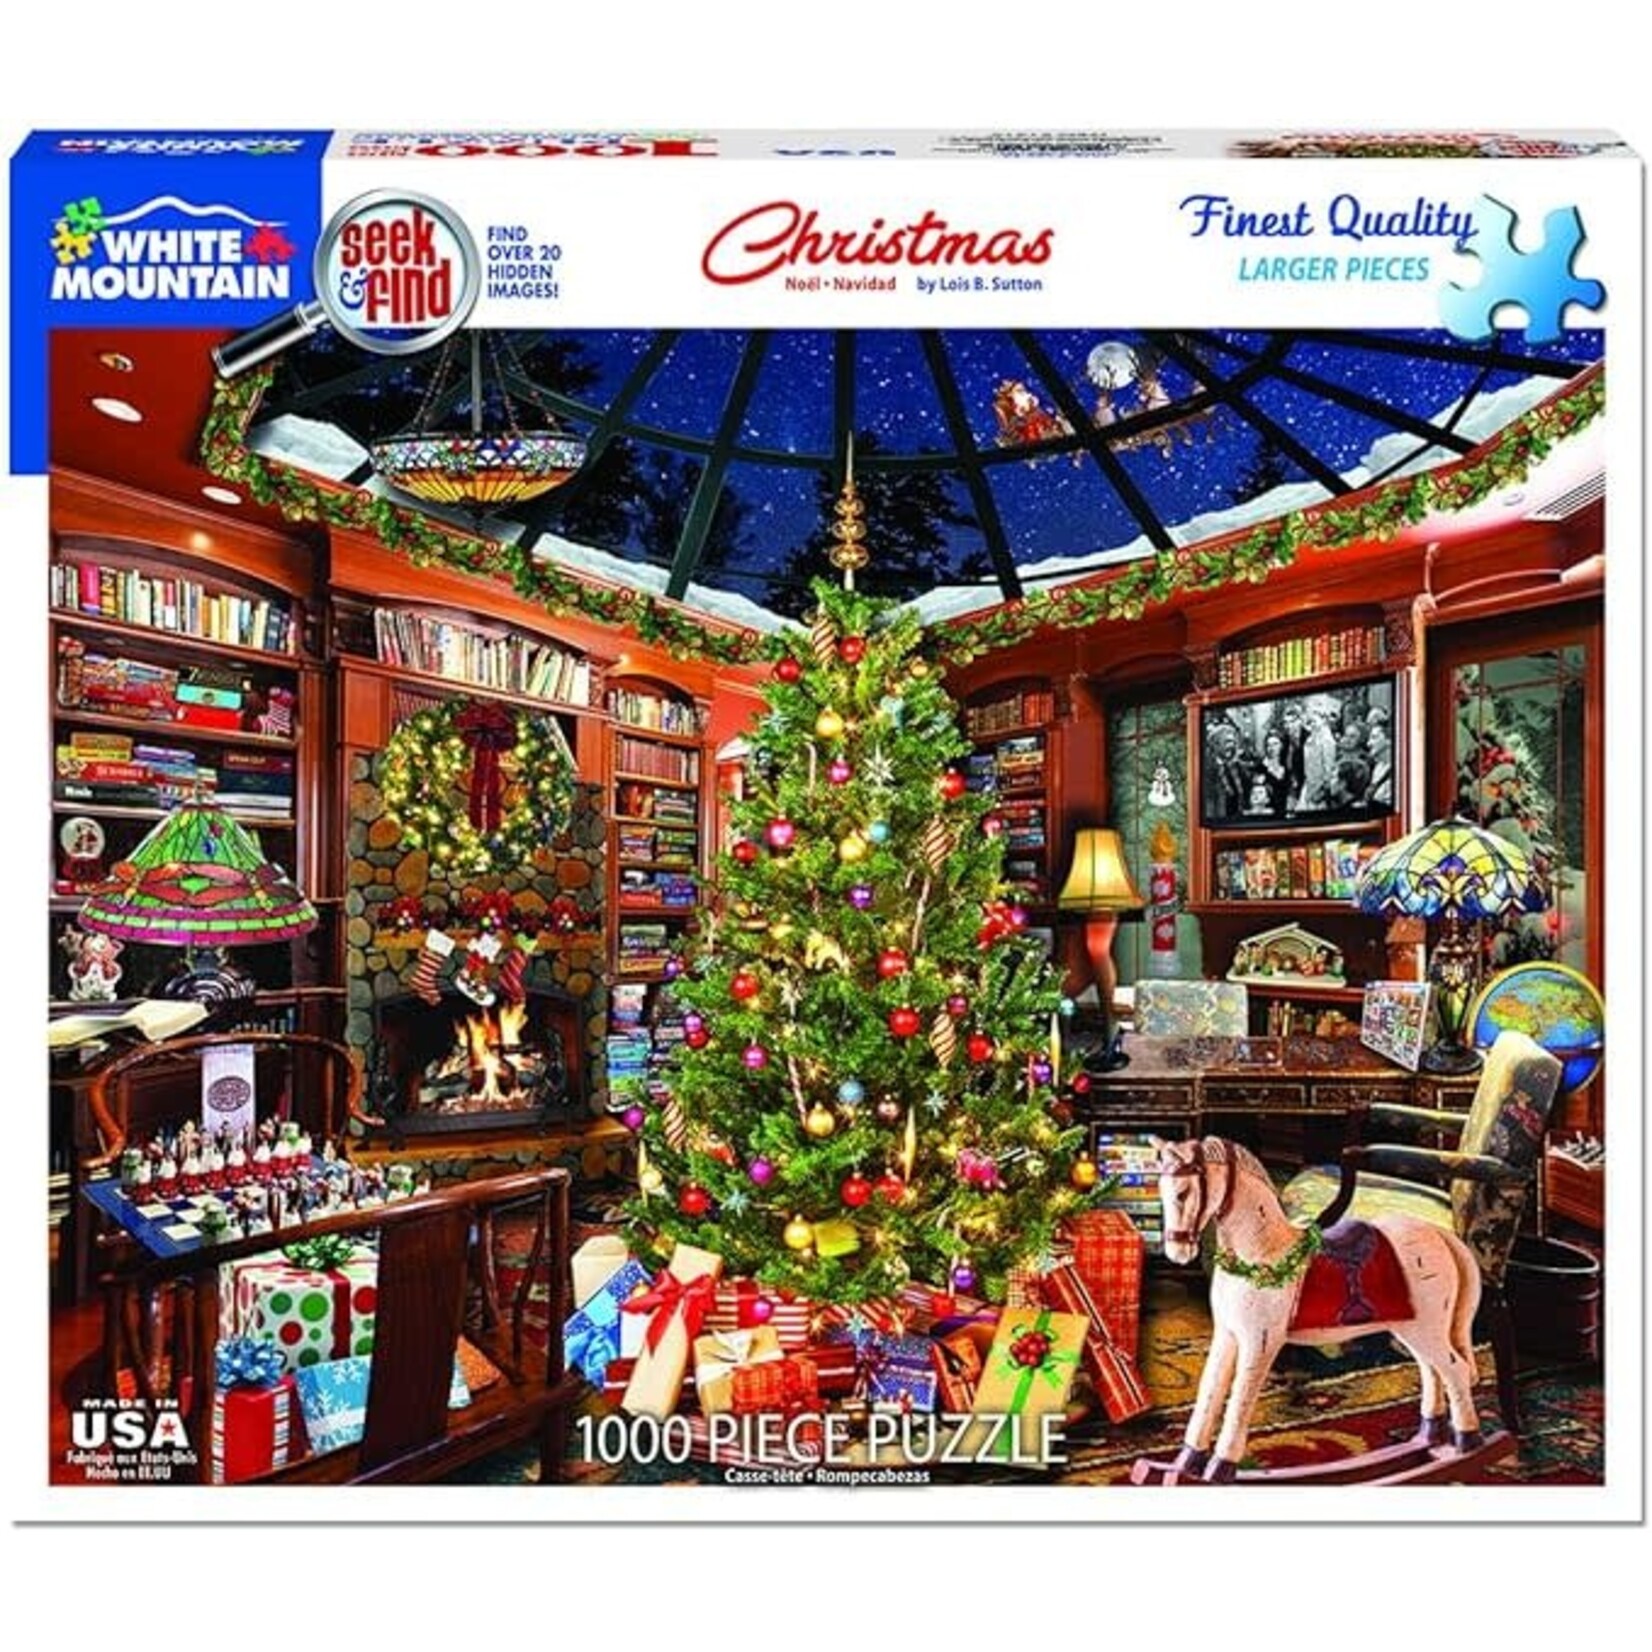 White Mountain Puzzles Christmas, Seek & Find, 1000-Piece Jigsaw Puzzle